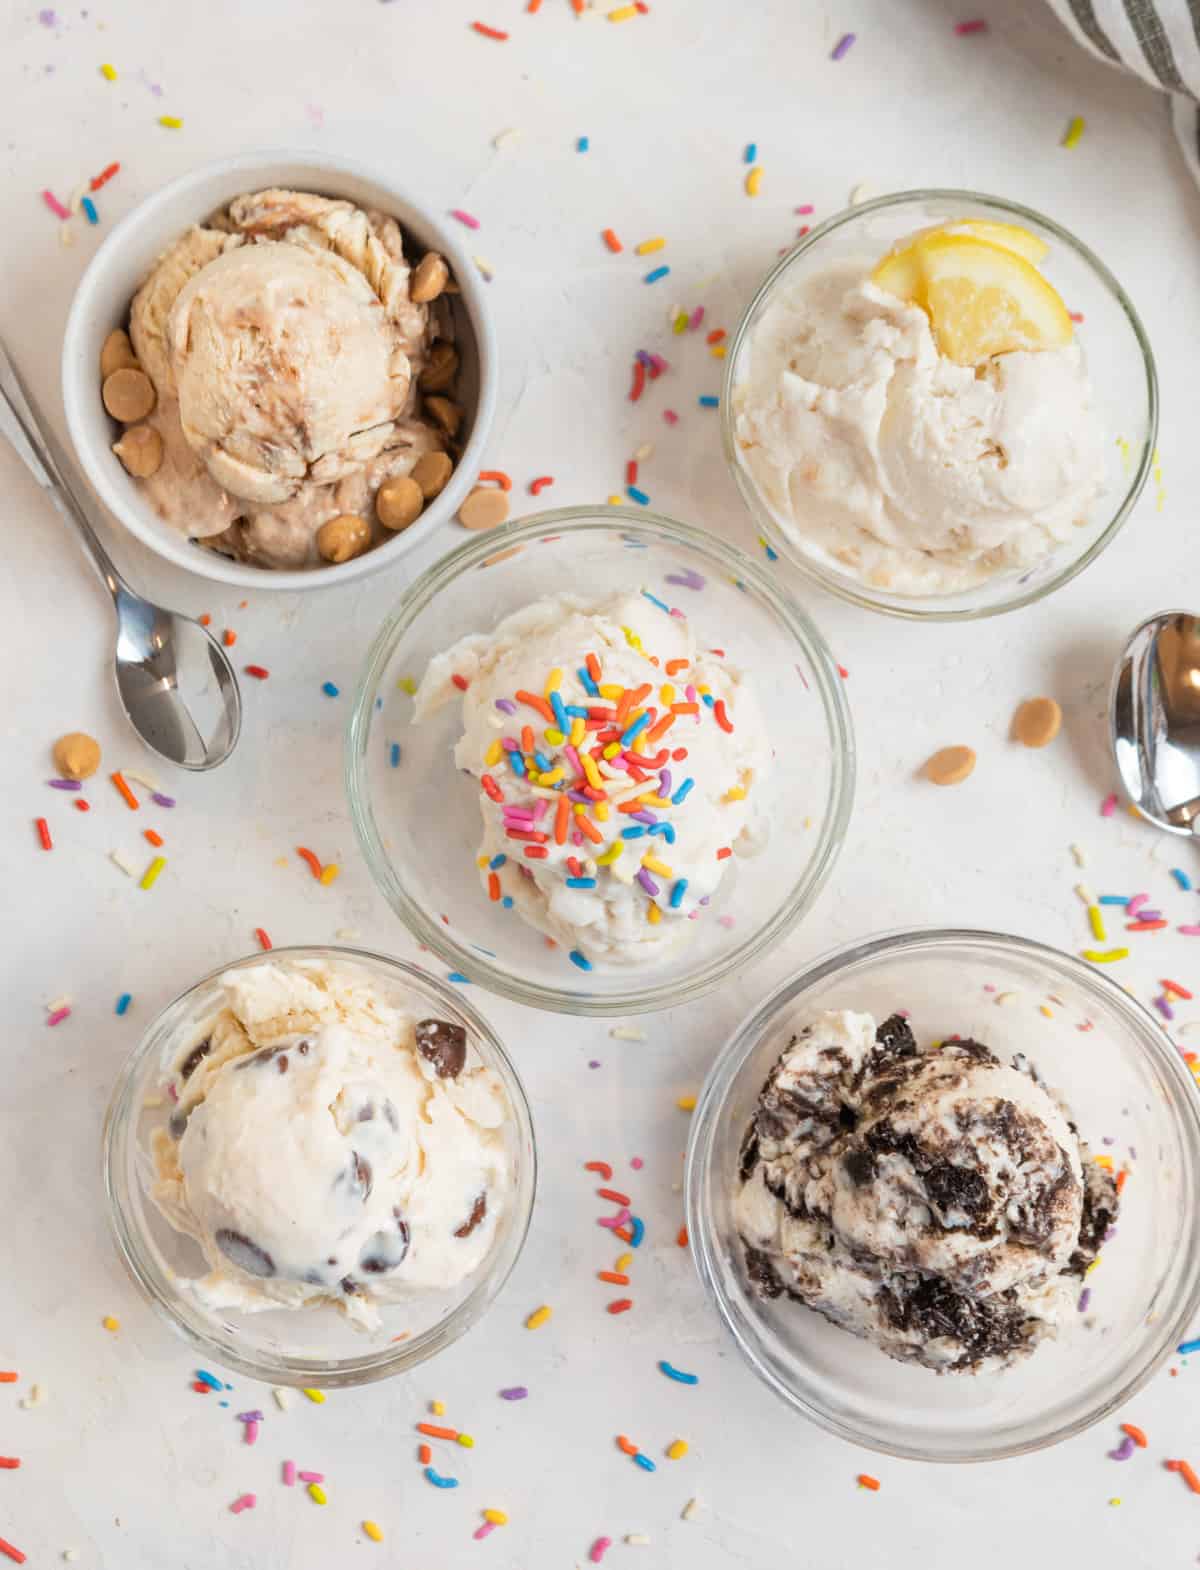 5 ice cream scoops in glasses with toppings.